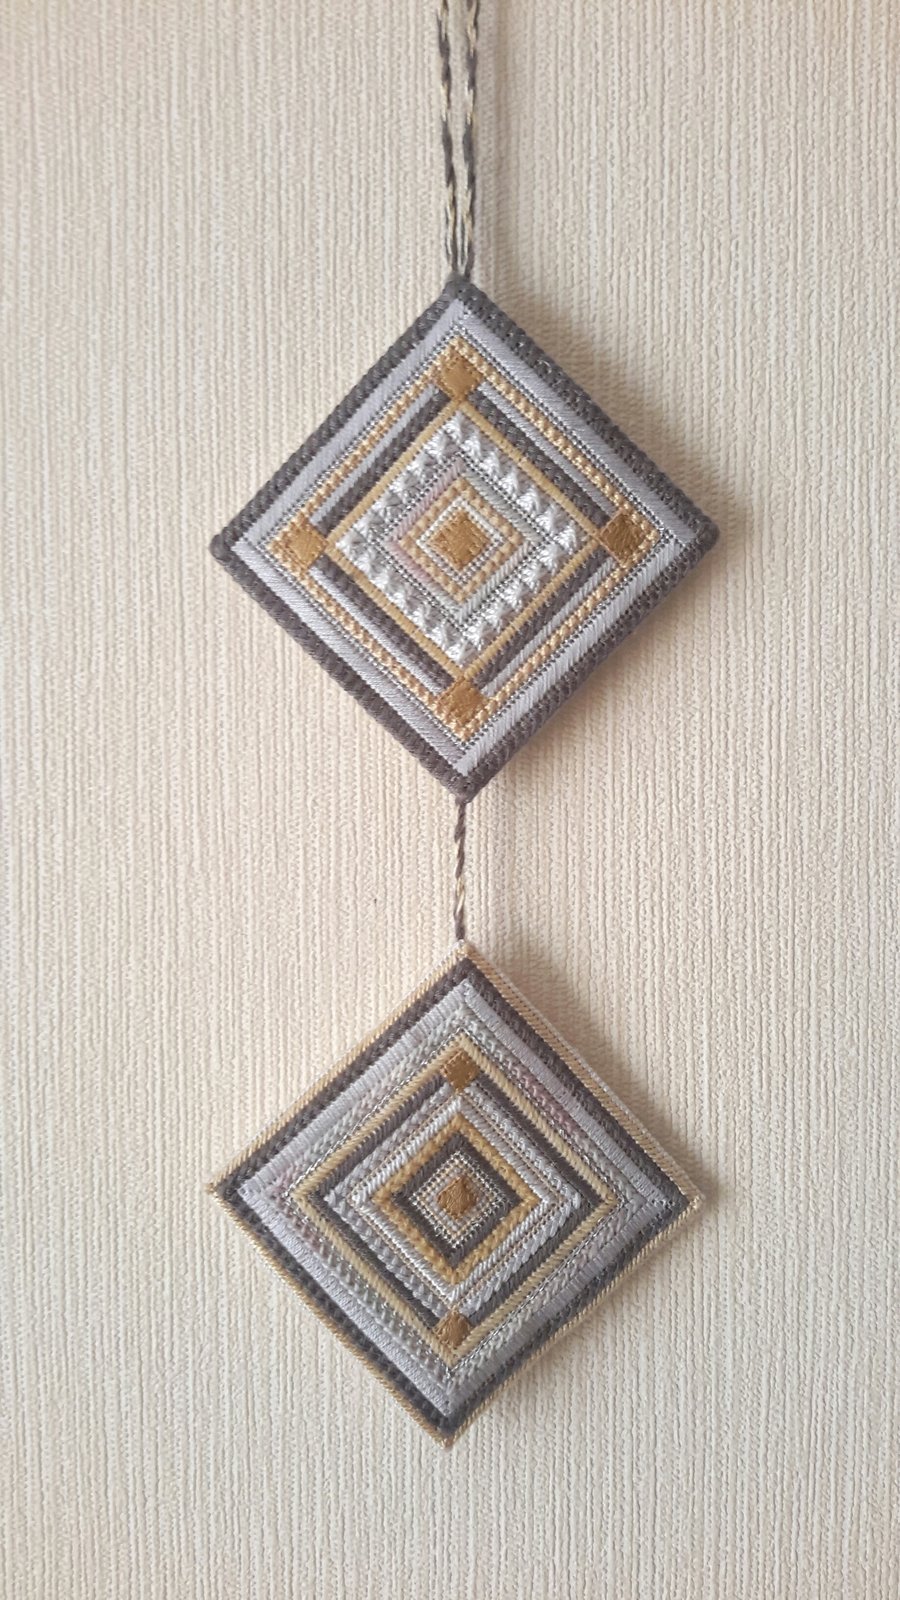 Reduced Double Needlepoint Tile Hanger,Canvaswork Wall hanging,Hand Embroidered 